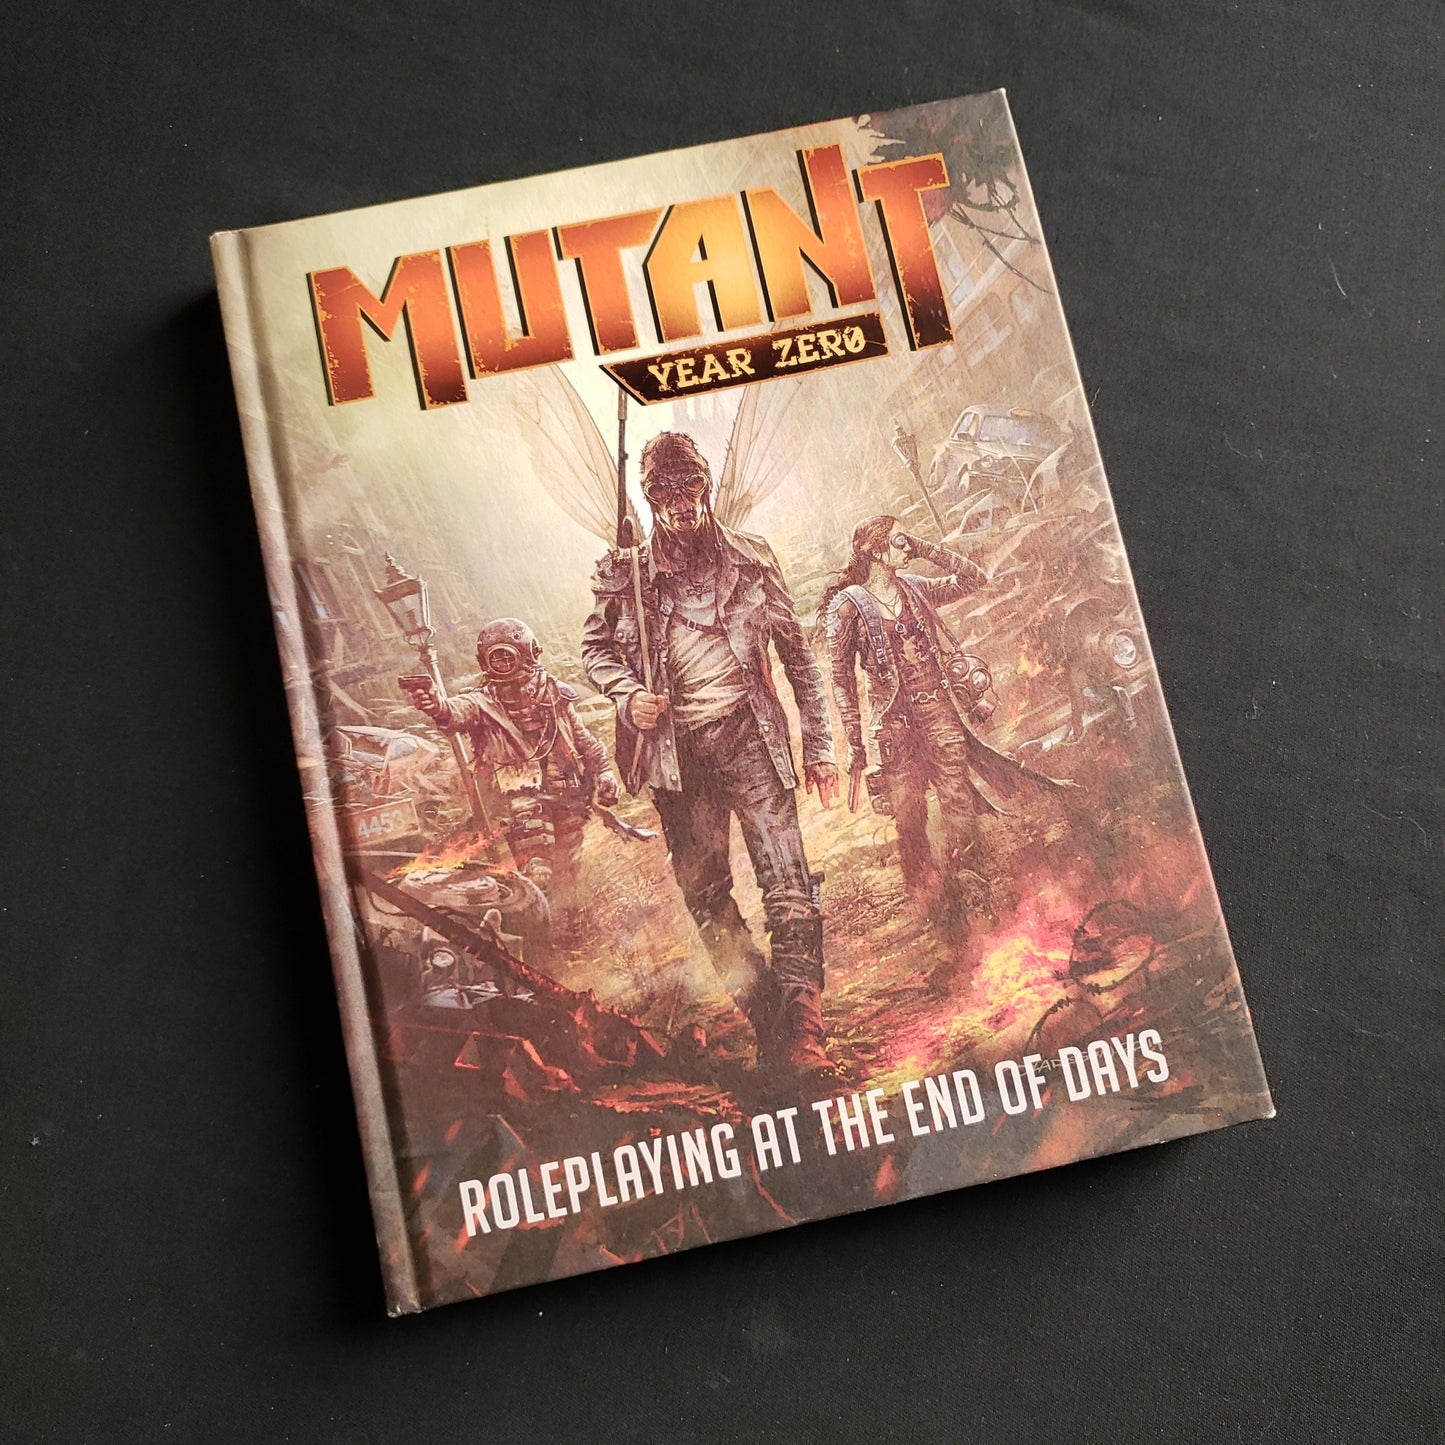 Image shows the front cover of the Core Rulebook for the Mutant: Year Zero roleplaying game